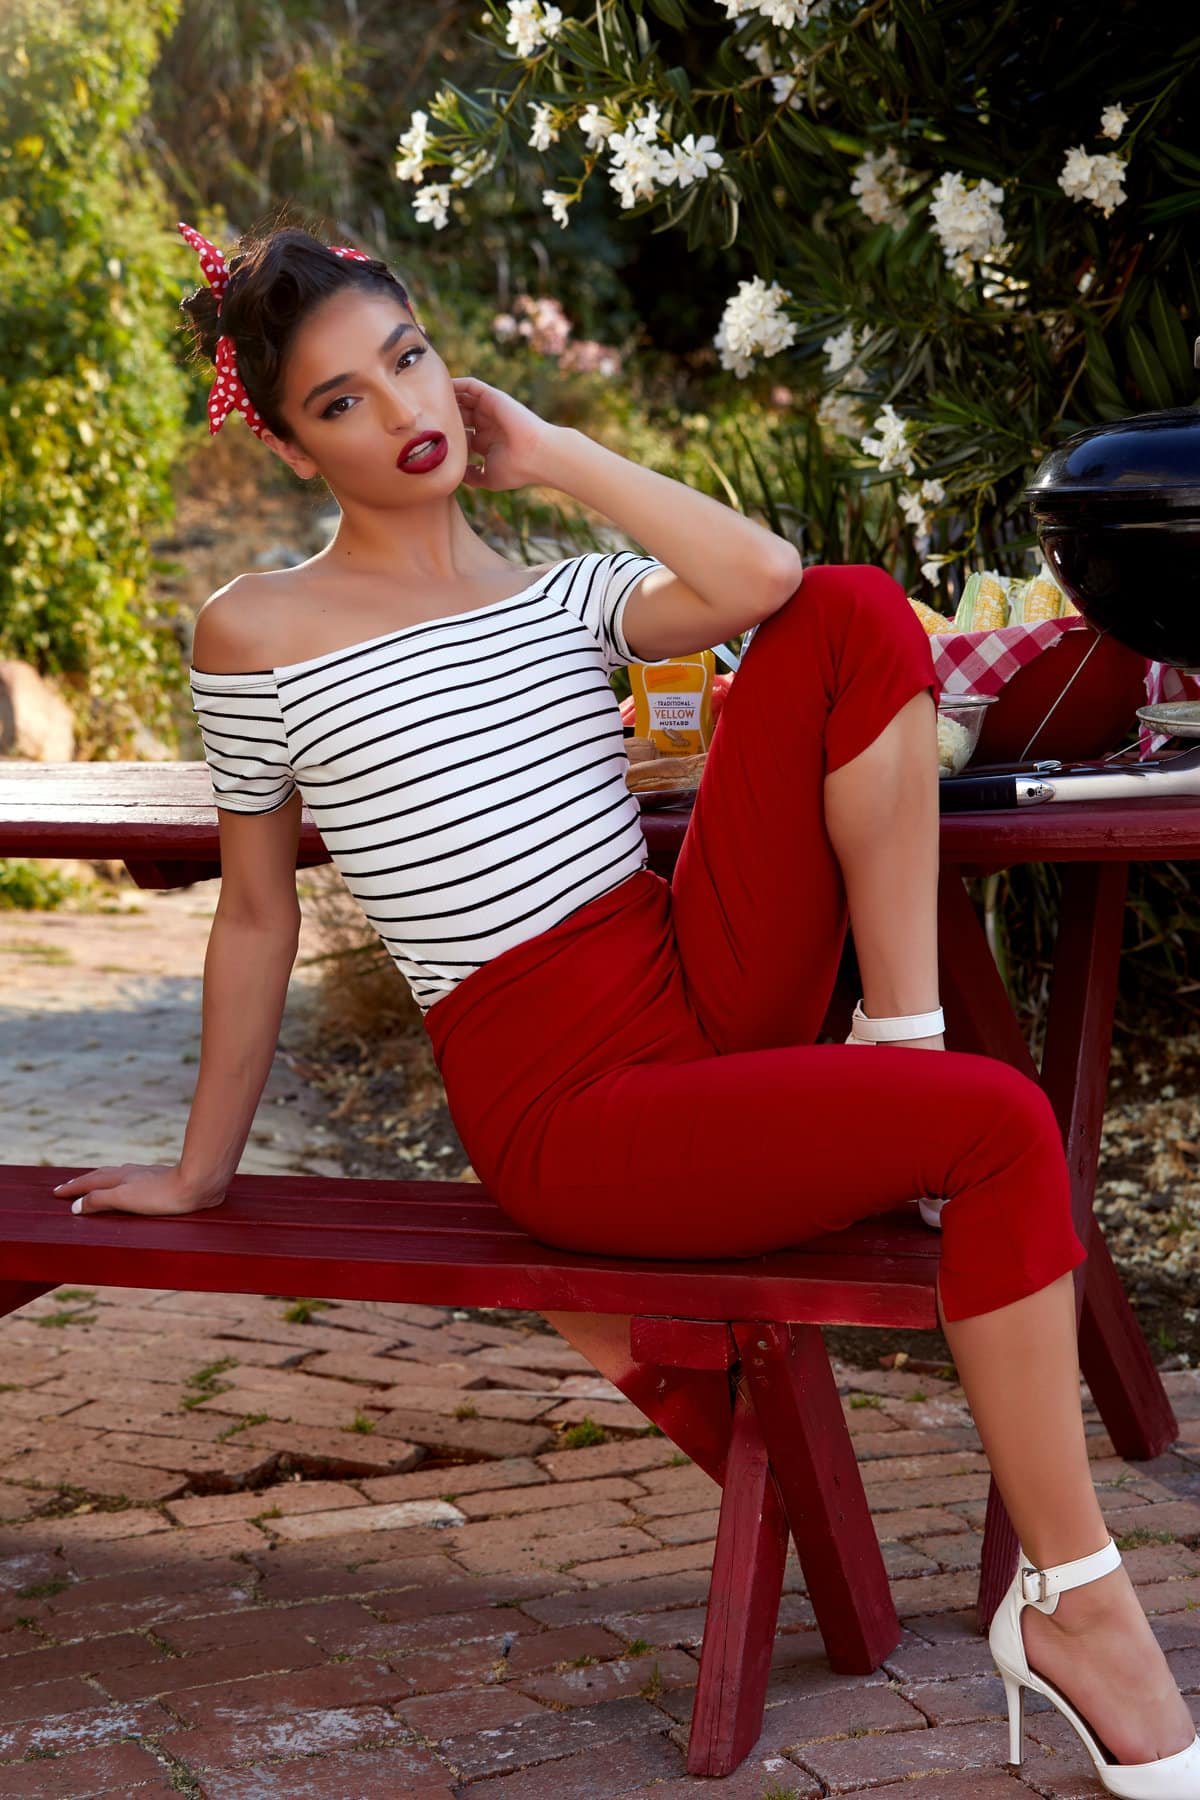 Emily Willis takes off her skin tight red pants in the outdoors